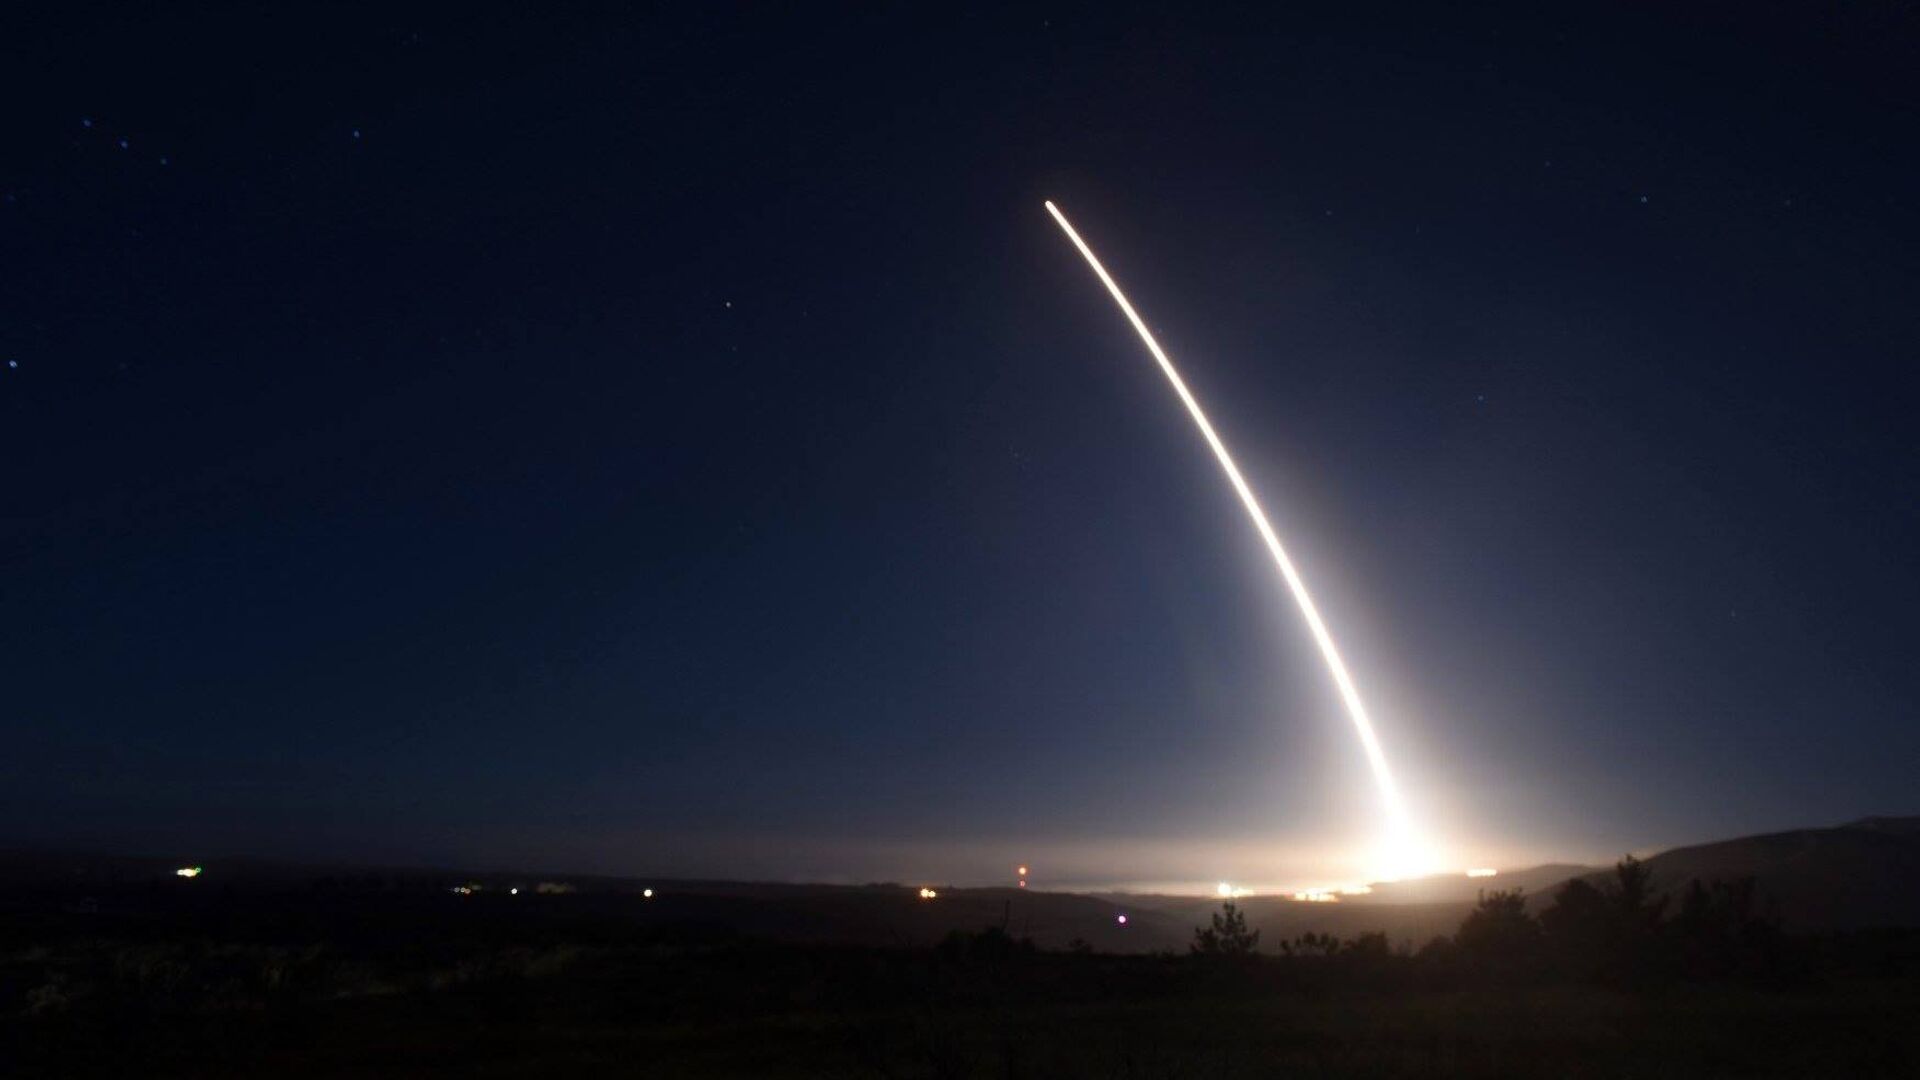 In this photo provided by U.S. Air Force, an unarmed Minuteman III intercontinental ballistic missile launches during an operational test on Saturday, Feb. 20, 2016 at Vandenberg Air Force Base, California. - Sputnik Moldova-România, 1920, 05.05.2021